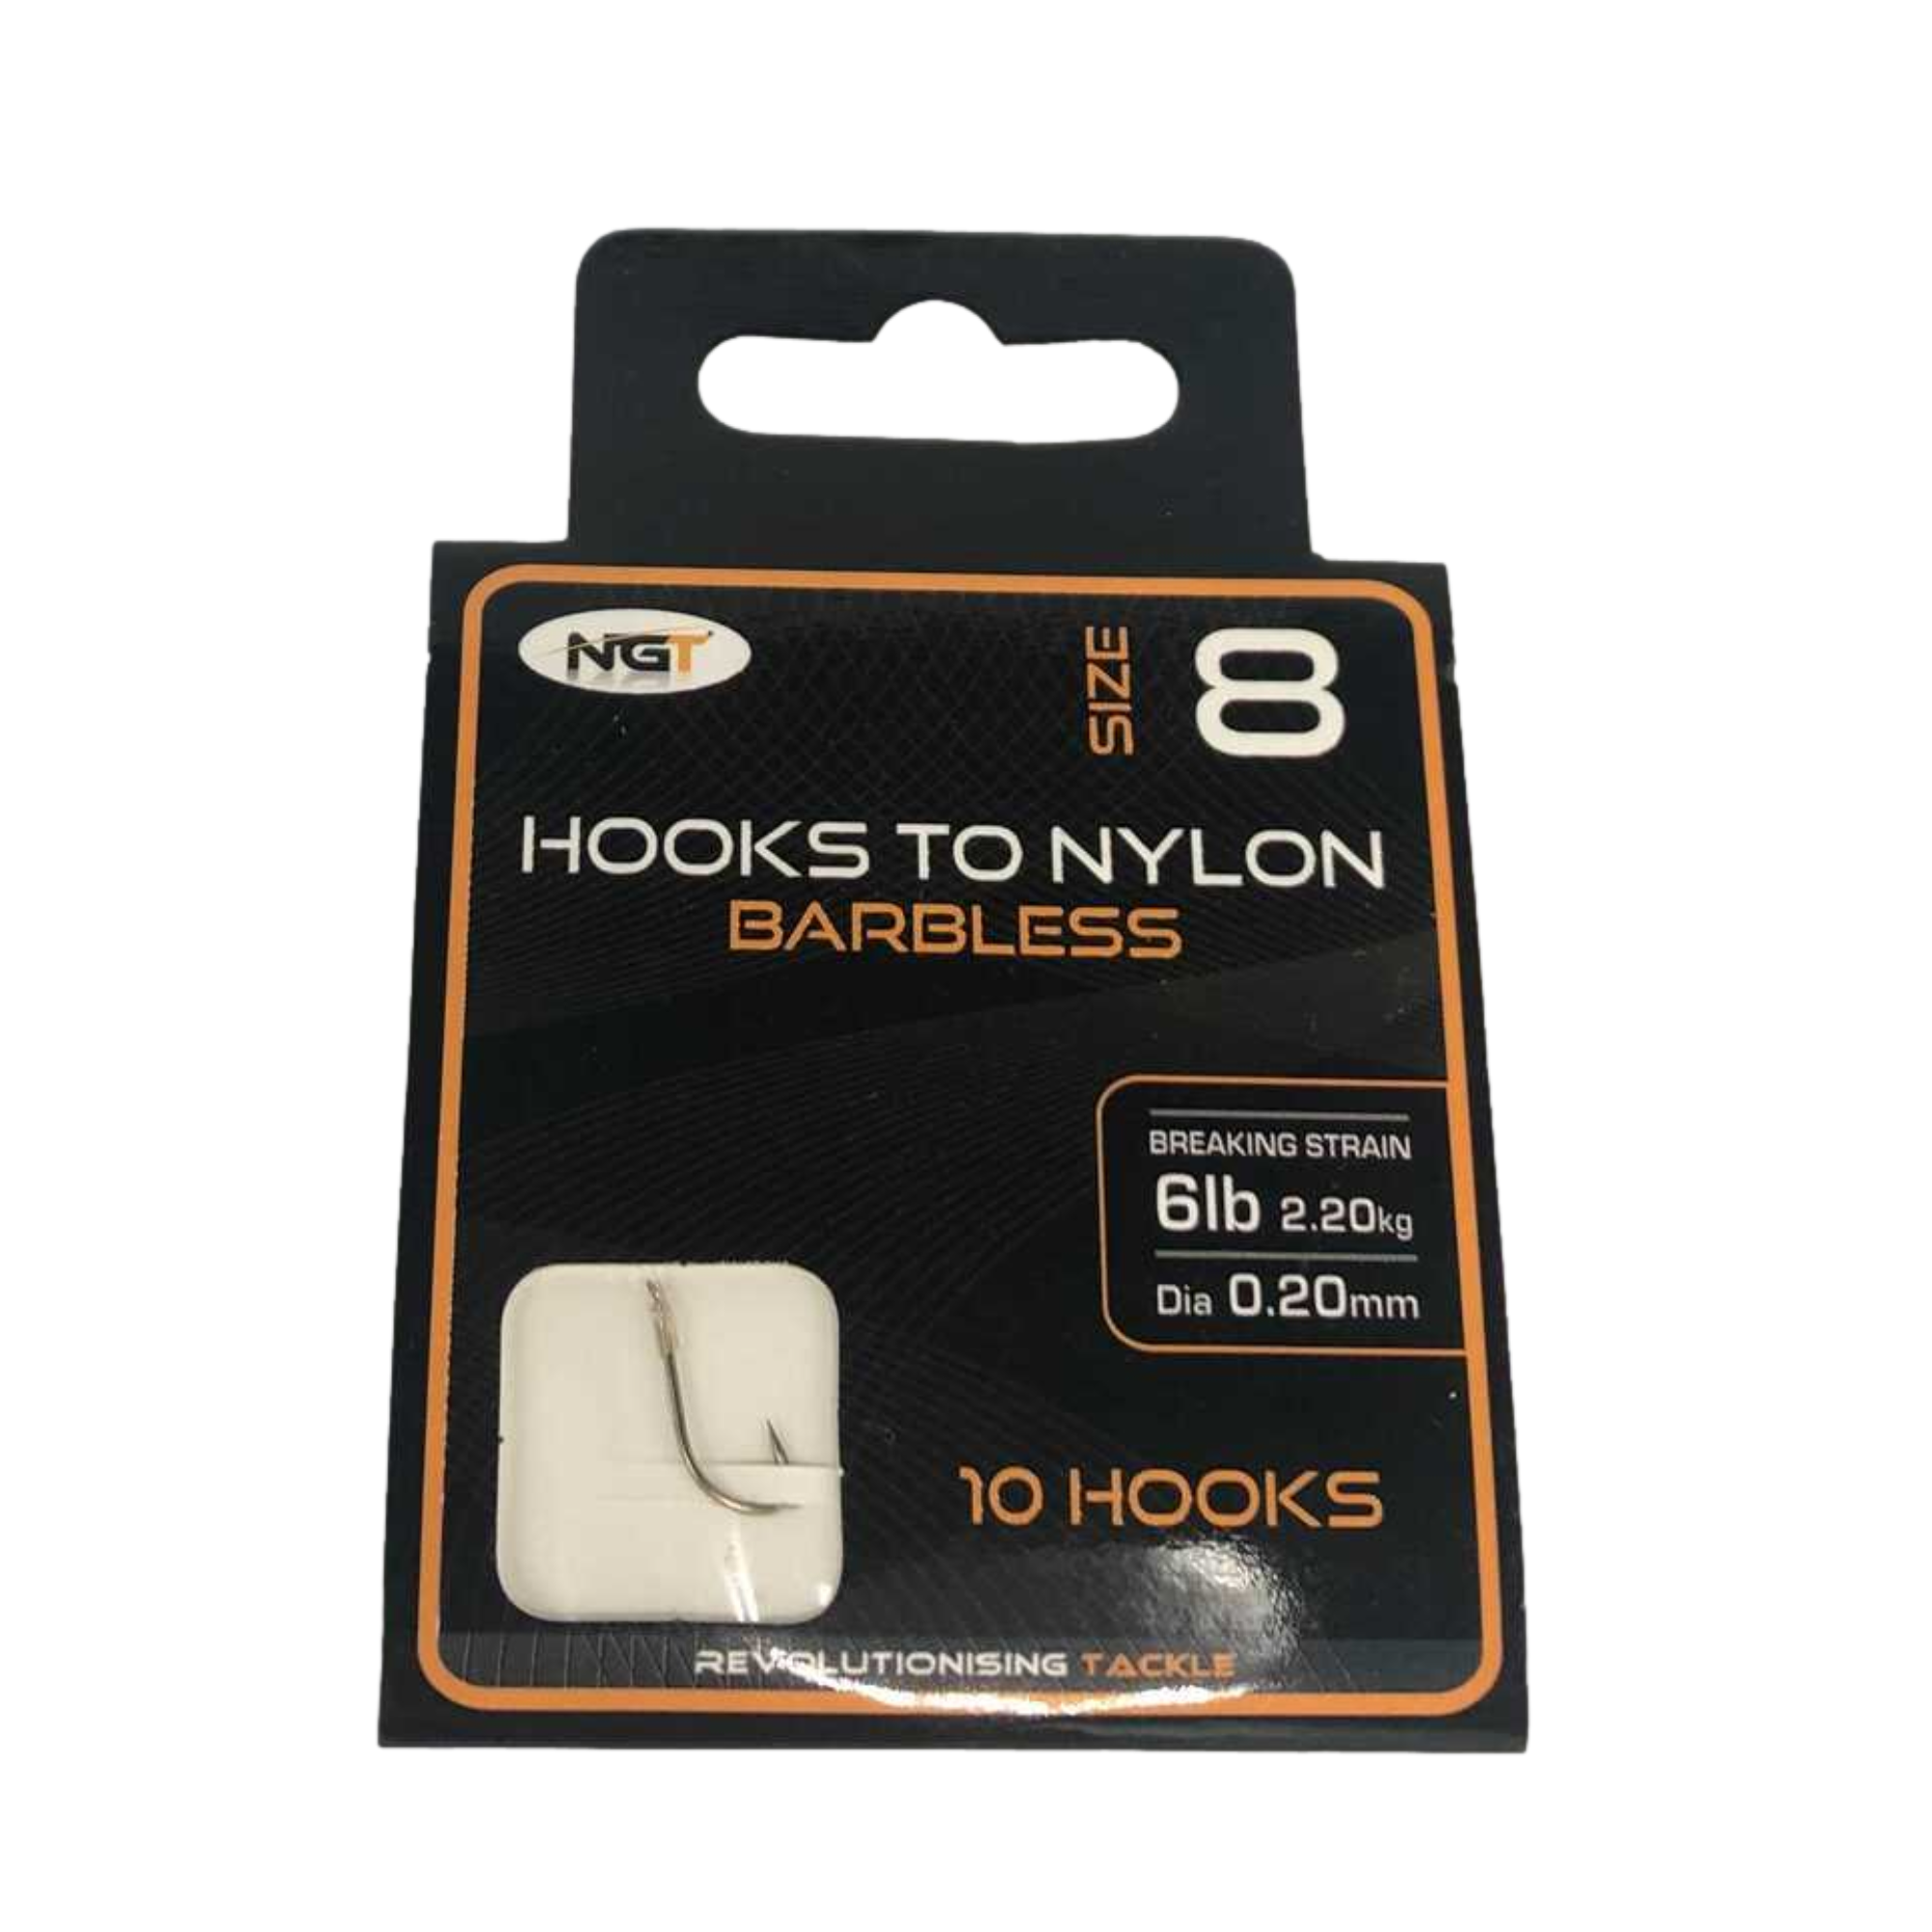 NGT Barbless Hooks to Nylon Sizes 10 12 14 16 18 NGT Fishing Tackle Carp Pack 10 